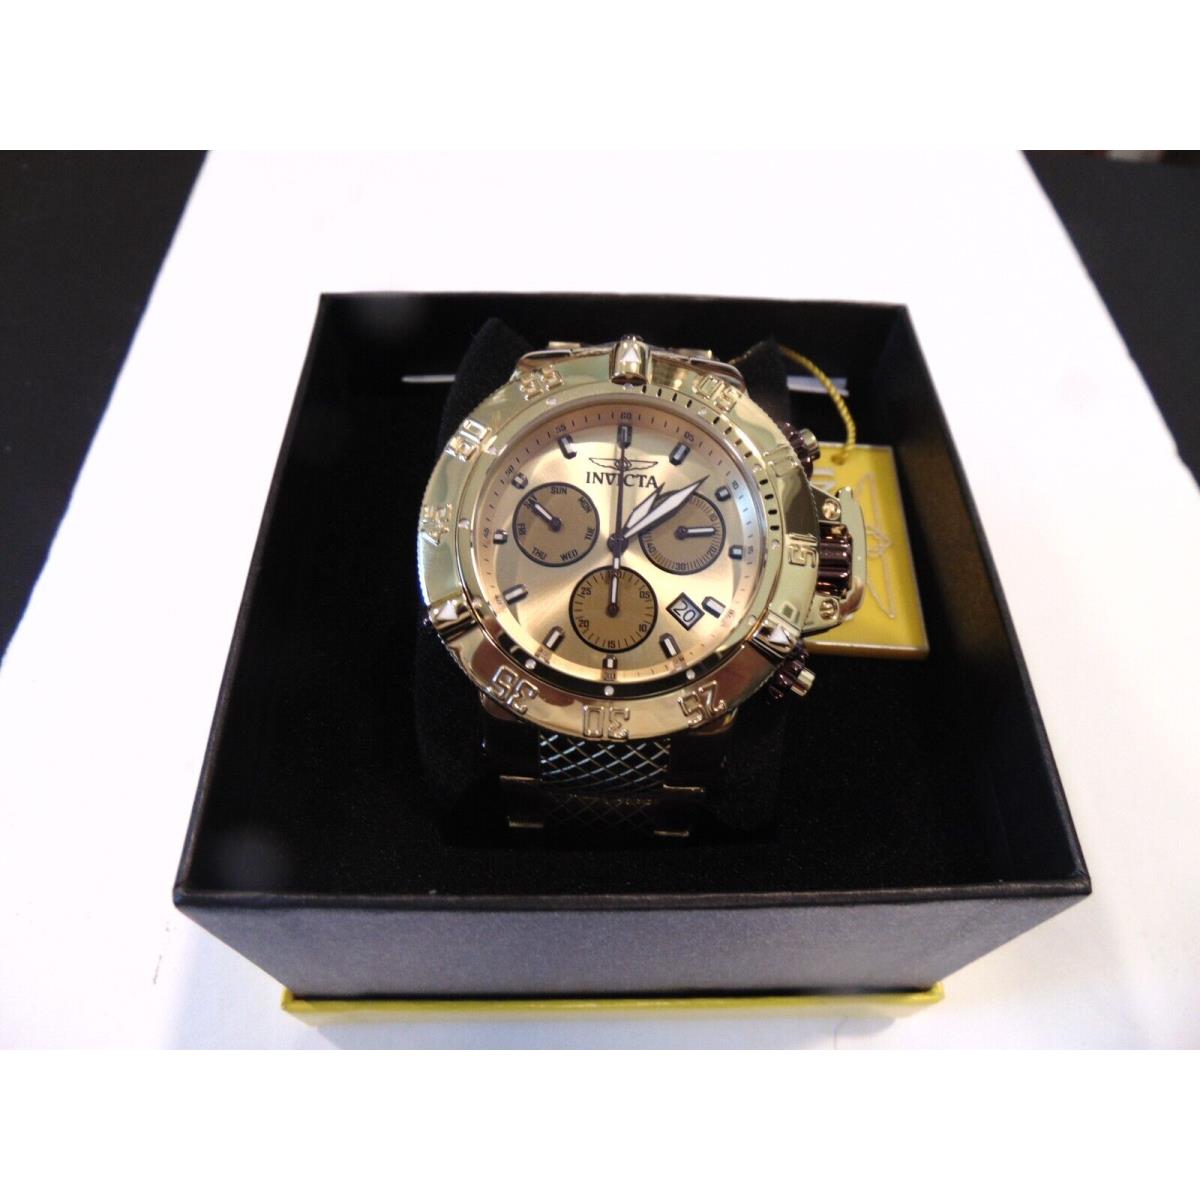 Invicta watch Subaqua Noma III - Champagne Dial, Gold Band, Gold Bezel